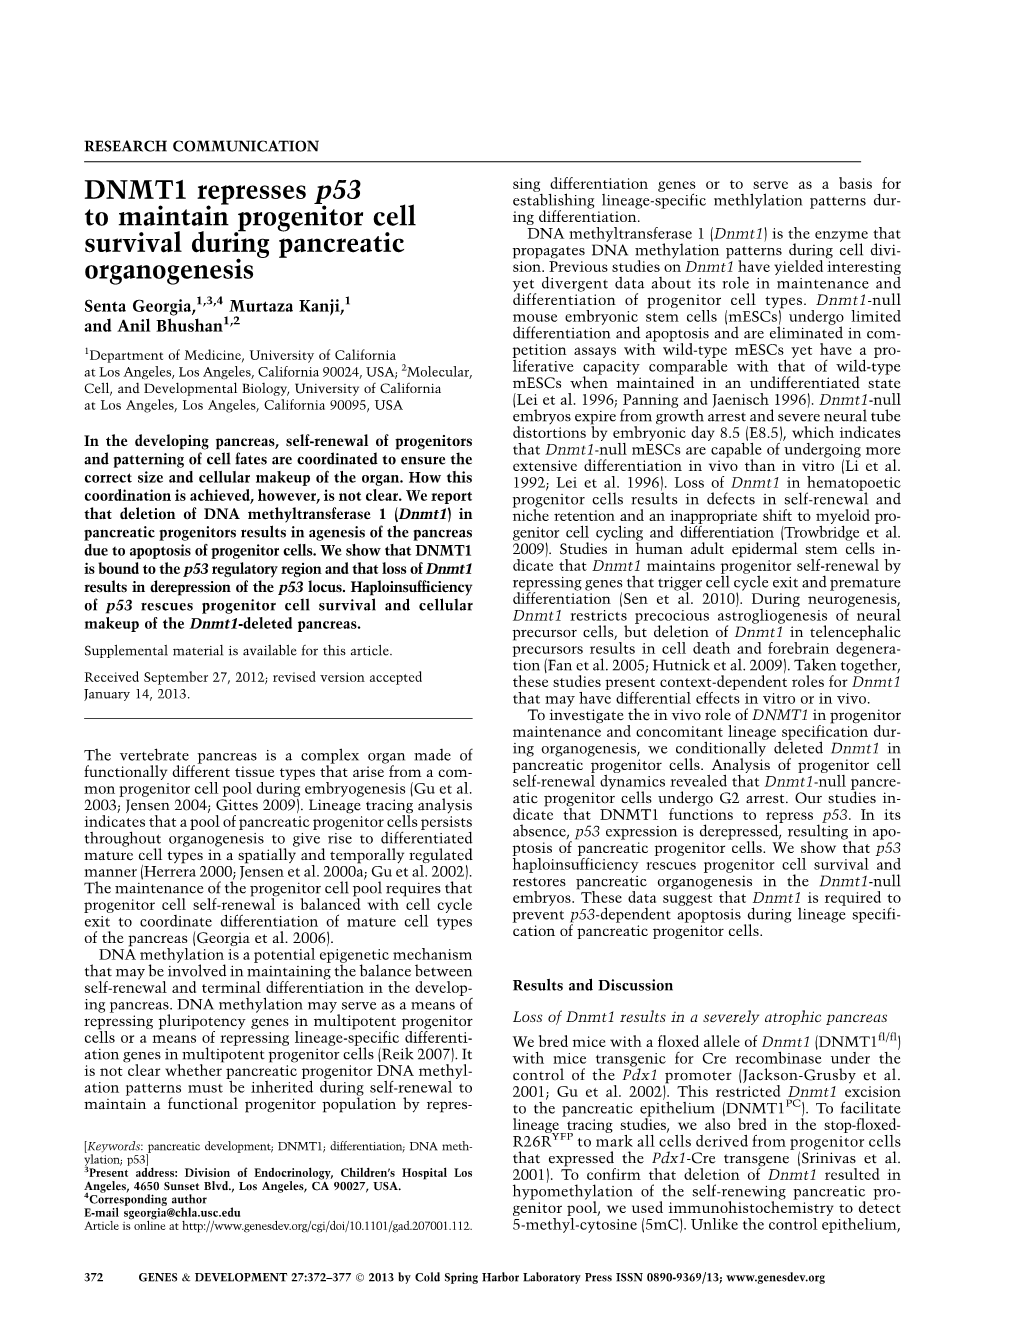 DNMT1 Represses P53 to Maintain Progenitor Cell Survival During